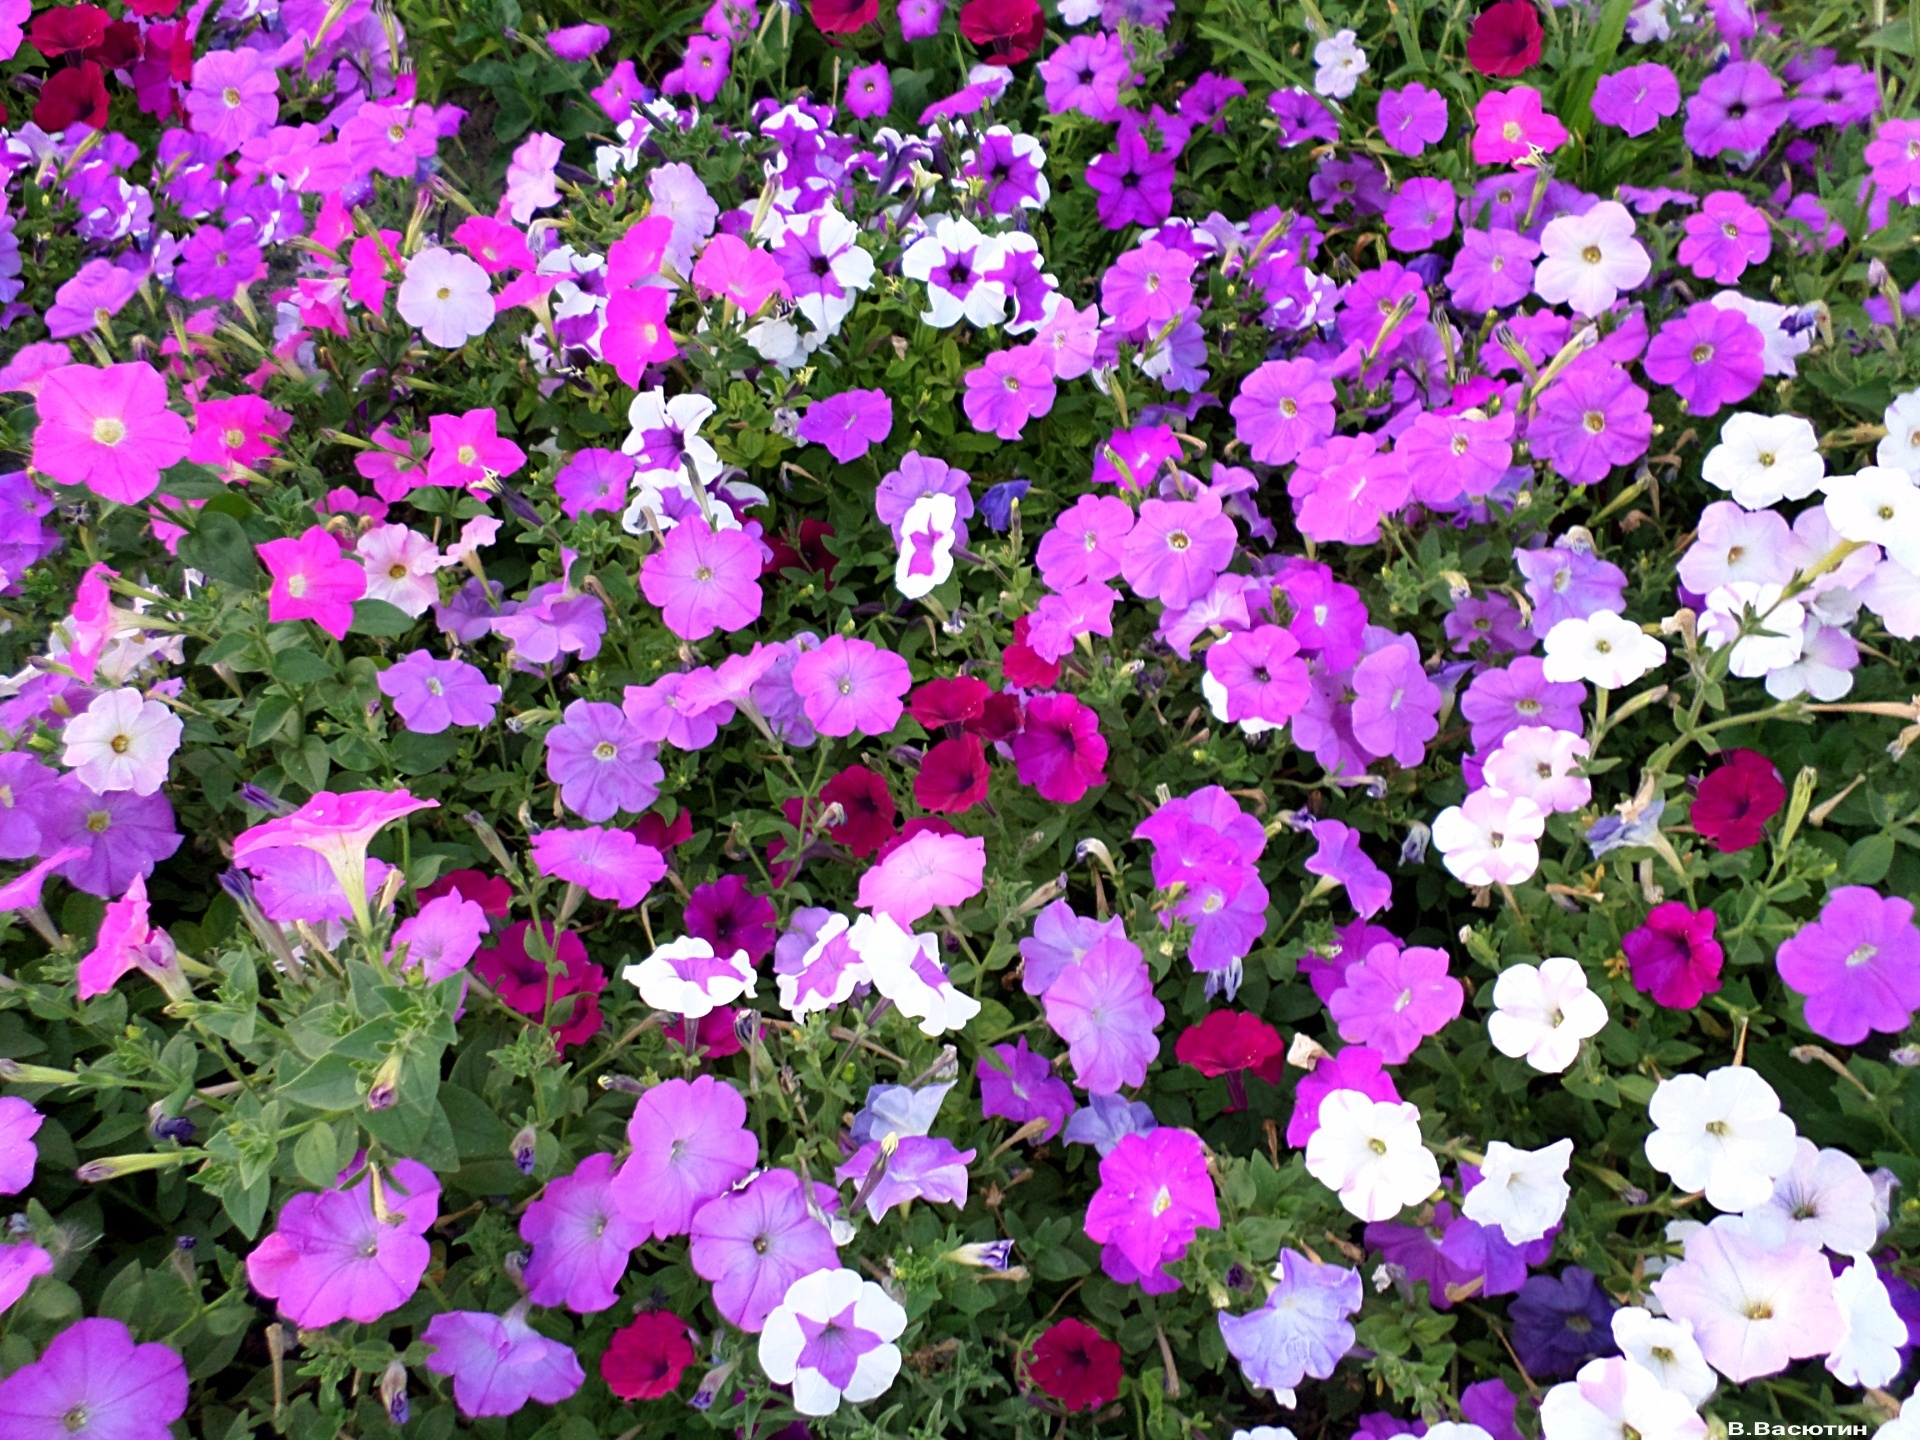 Wallpaper. Flowers. photo. picture. August, Petunia